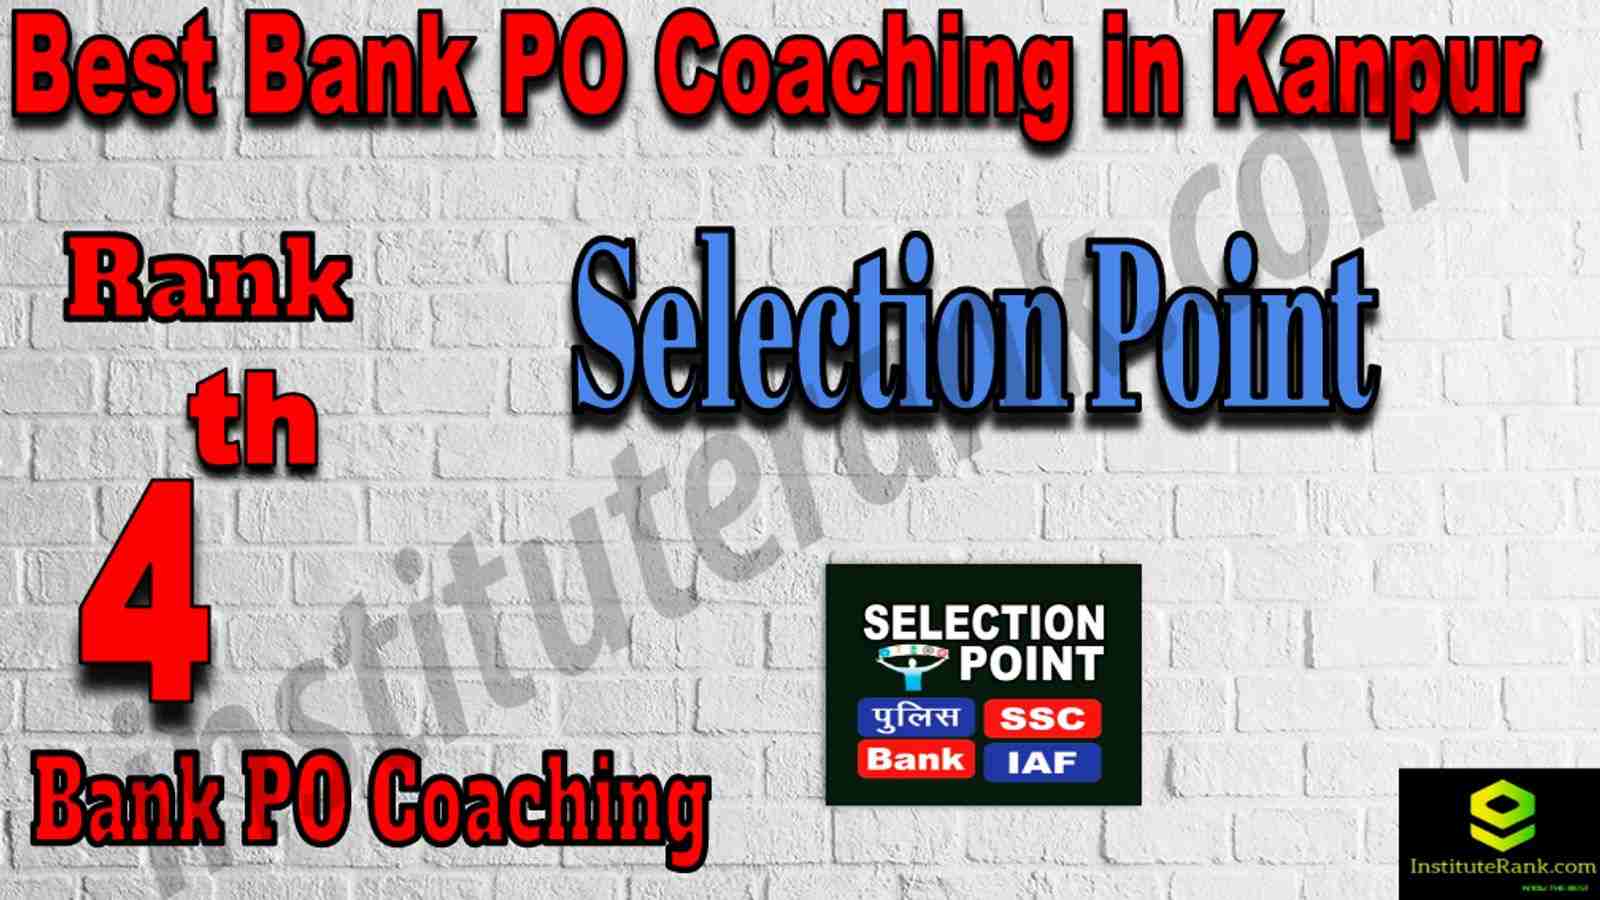 4th Best Bank PO Coaching in Kanpur